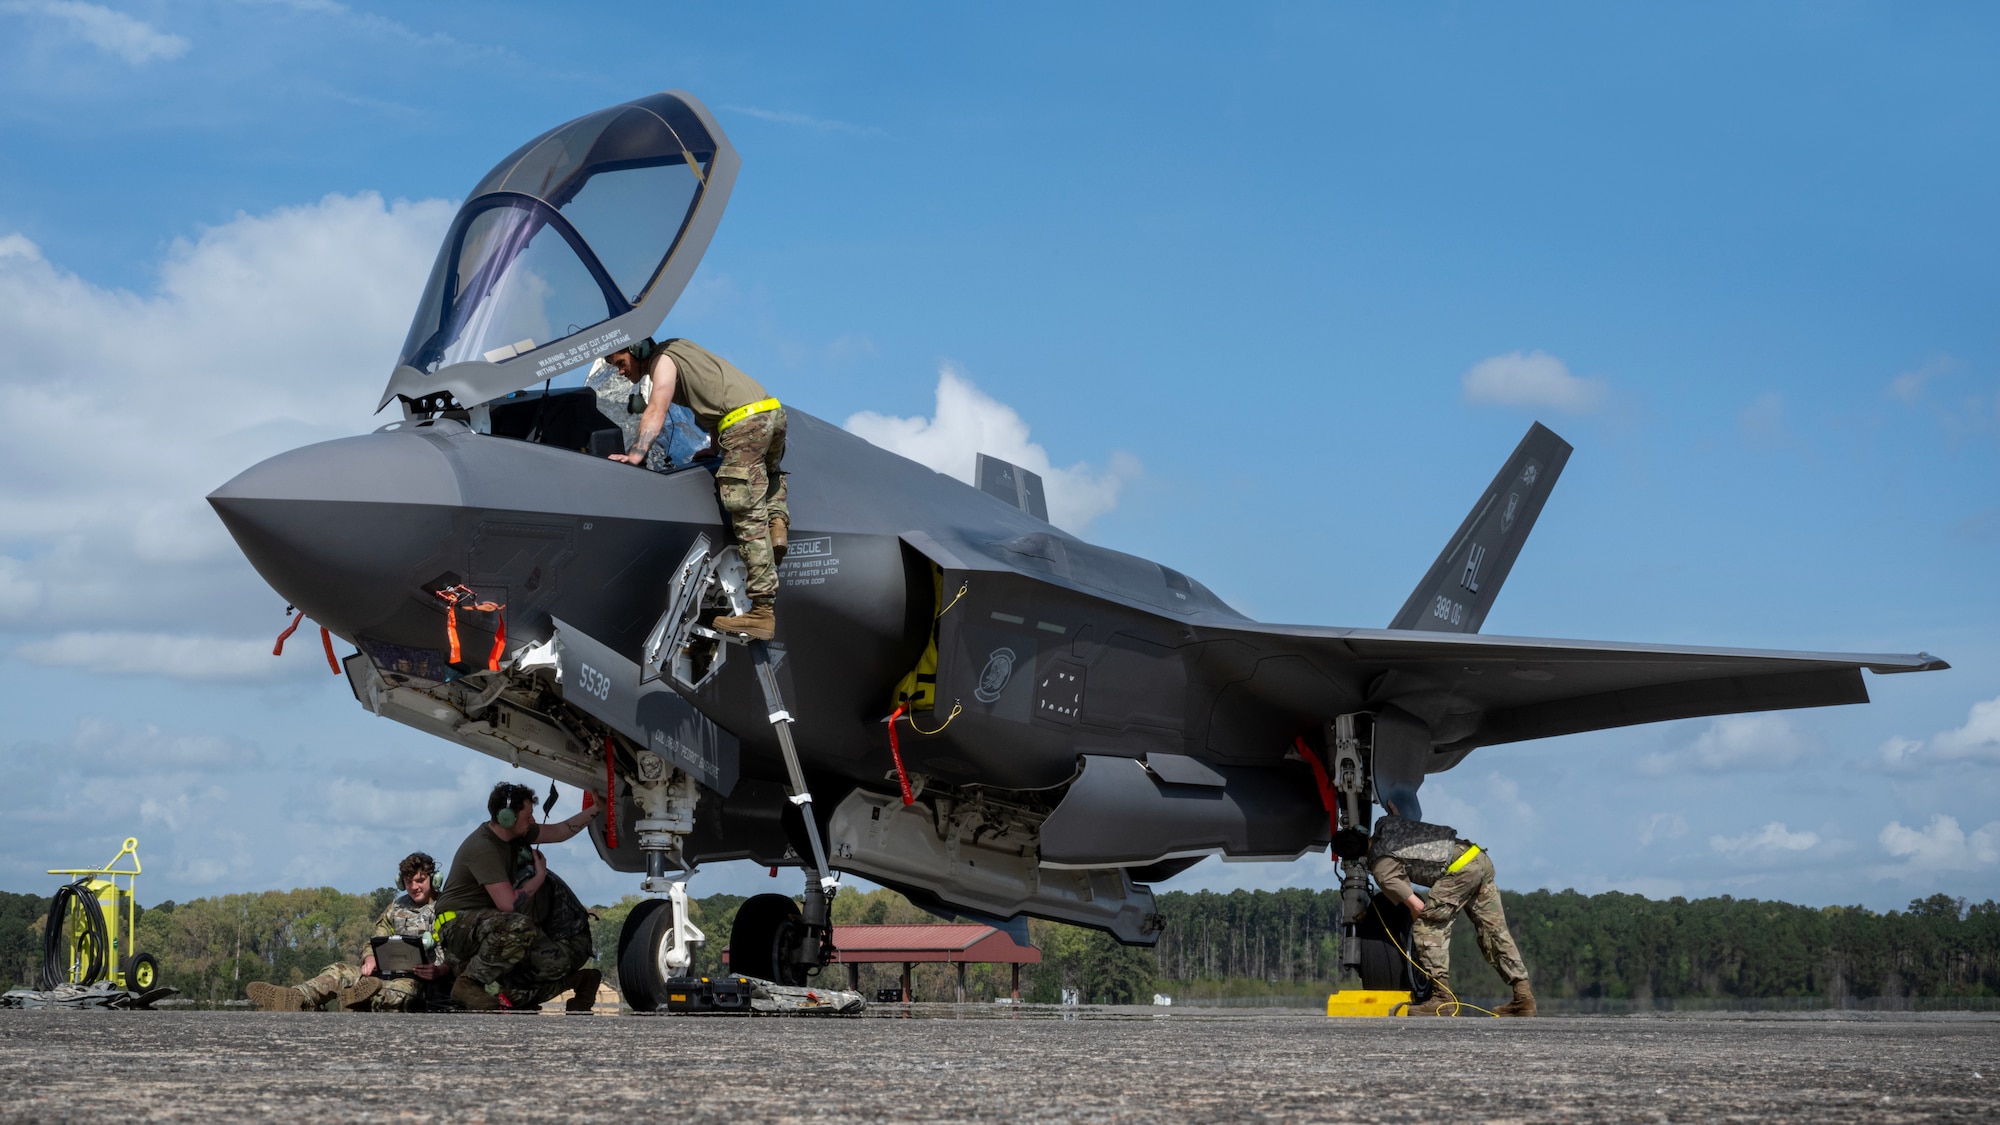 U.S. Air Force maintainers assigned to the 388th Maintenance Group at Hill Air Force Base, Utah, perform a pre-flight maintance check  on a Lockheed F-35 Lightning II aircraft assigned to the 4th Fighter Squadron assigned to Hill AFB, during AGILE FLAG 23-1, March 6, 2023.